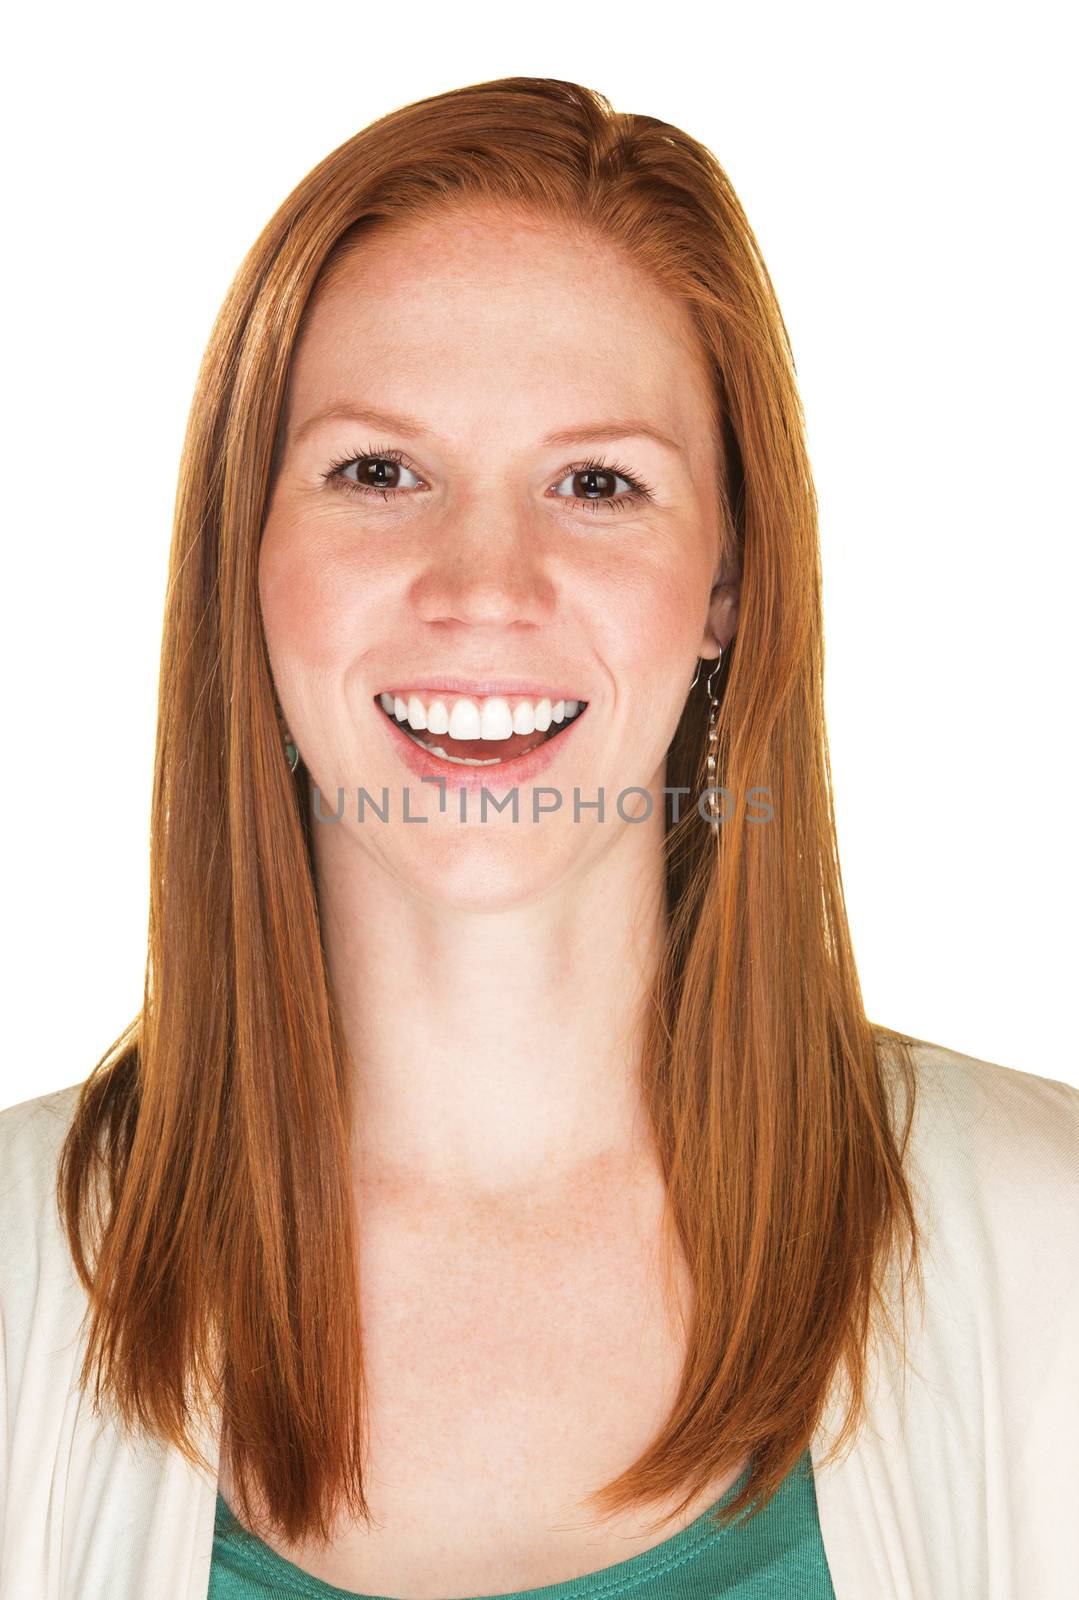 Cute young woman with red hair and smile